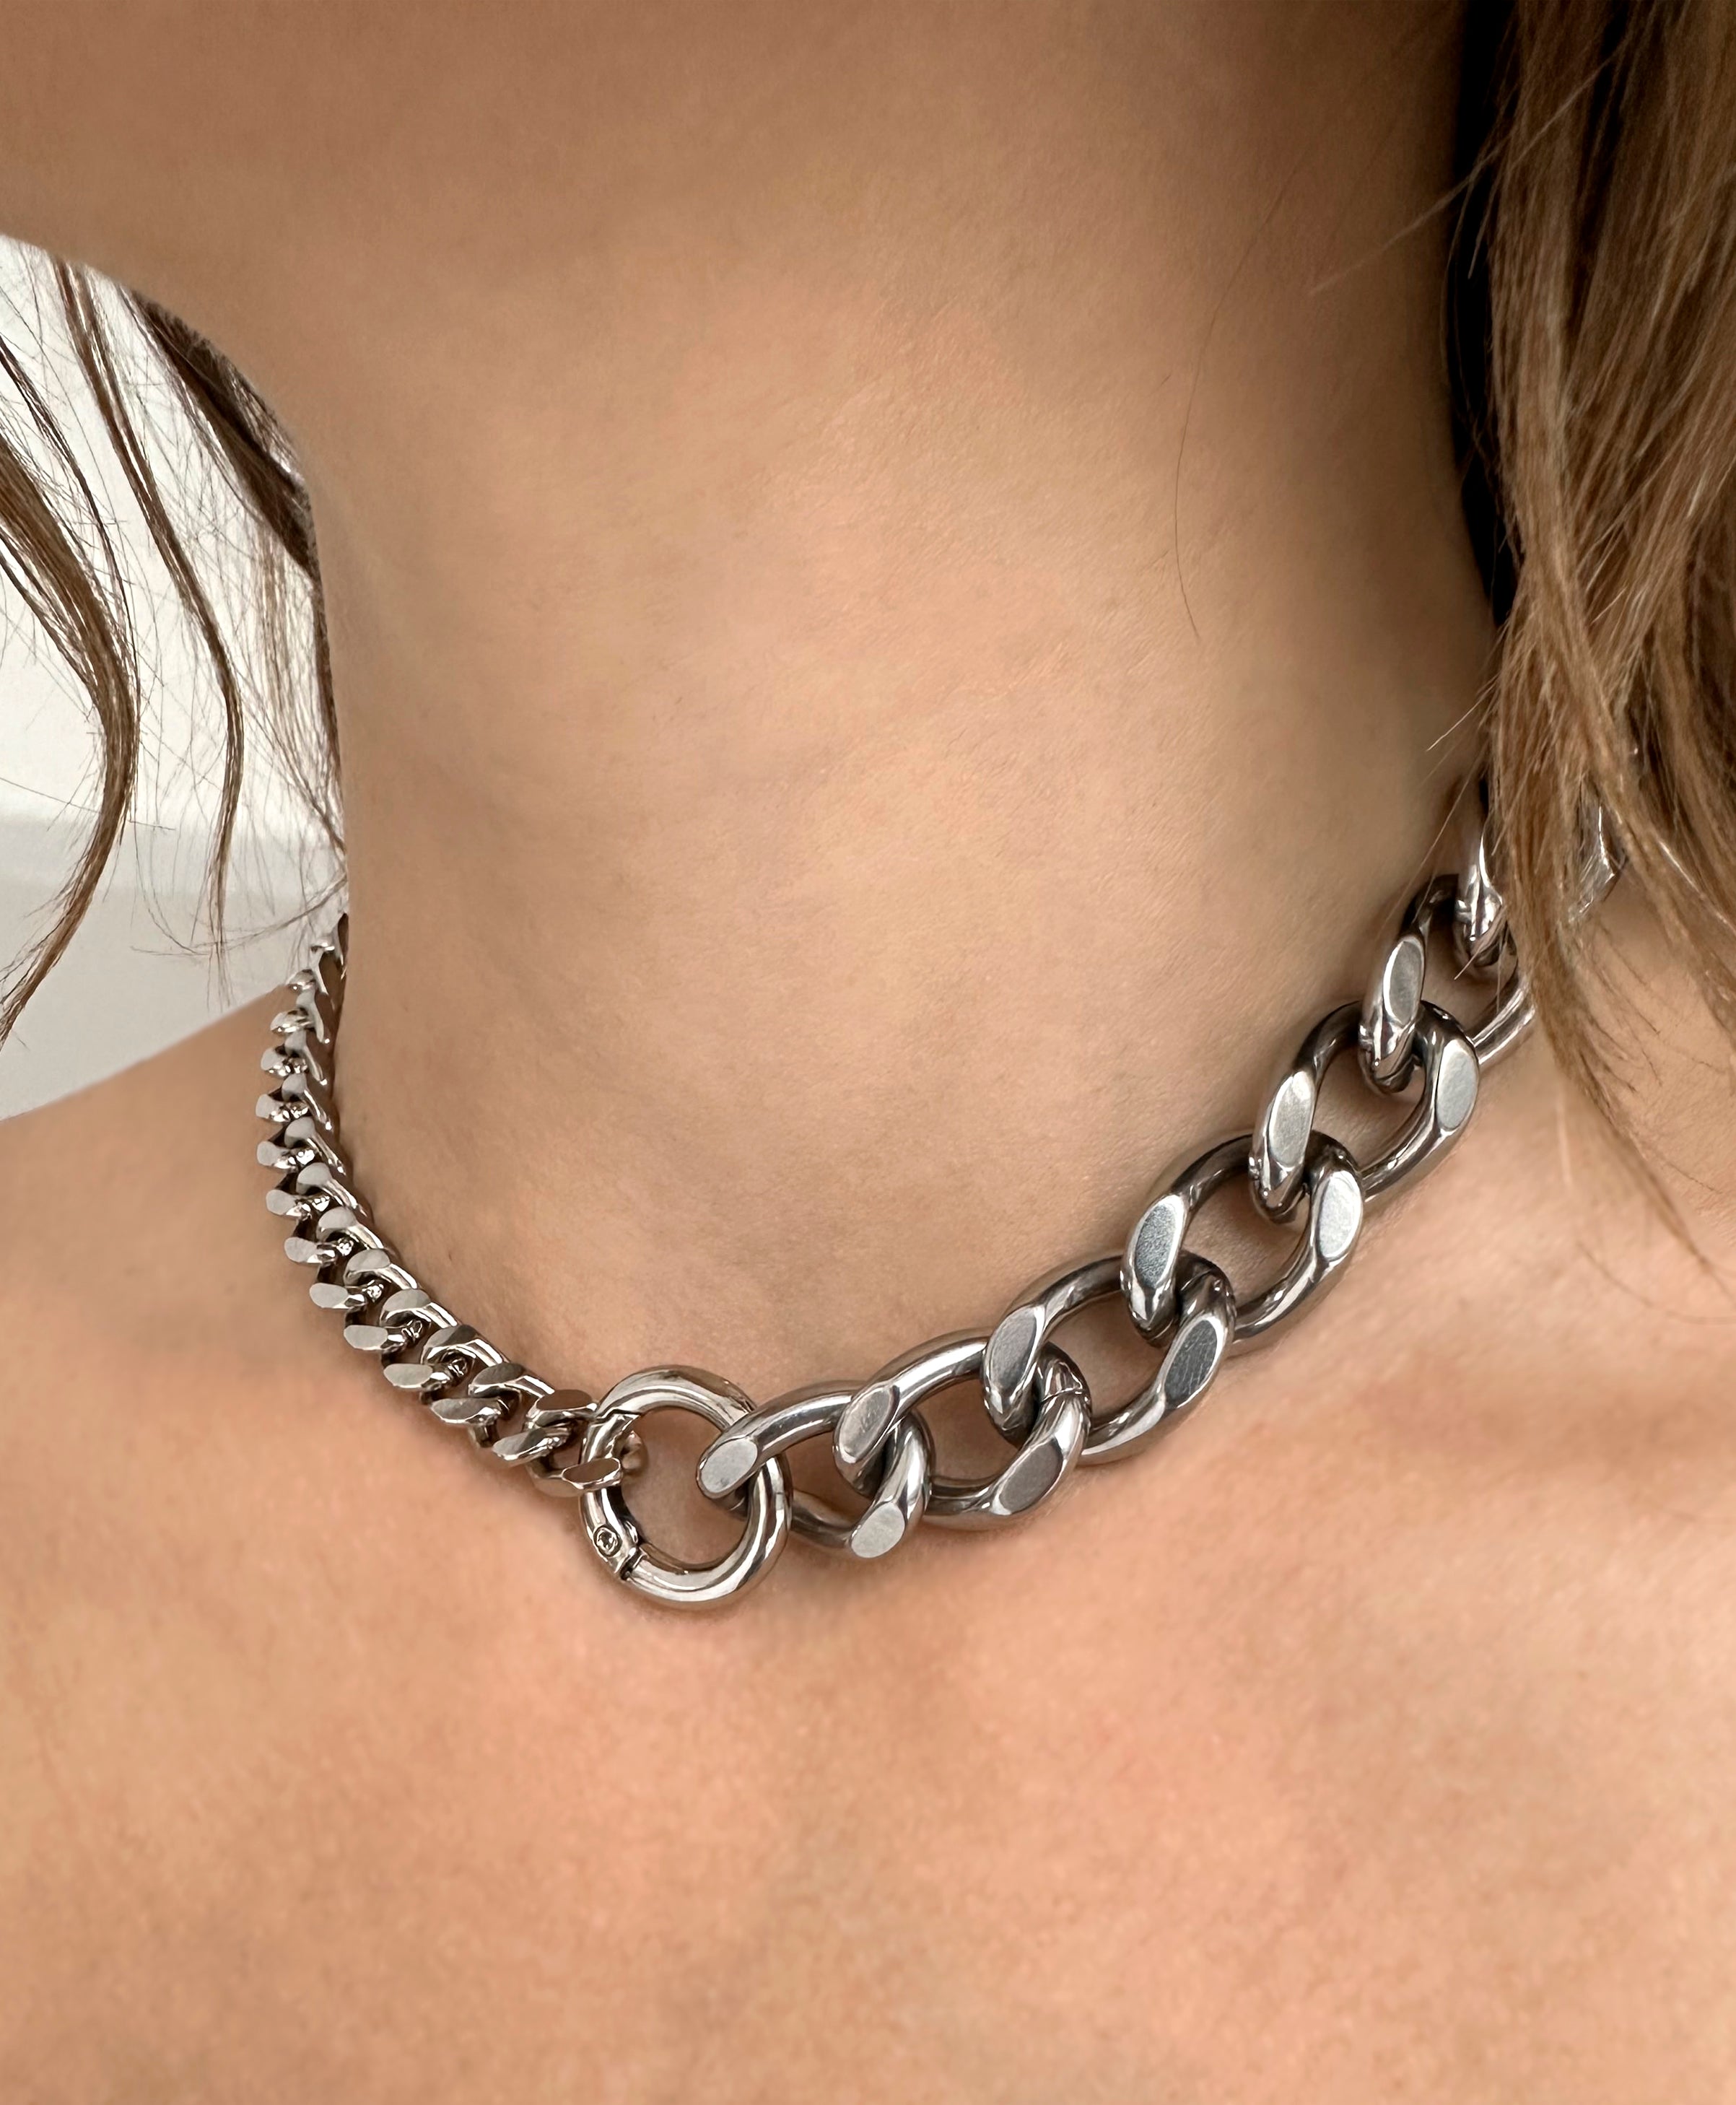 llayers-mens-women-jewelry-silver-stainlesssteel-choker-chain-necklace-unchained-010-Brooklyn-New-York-2